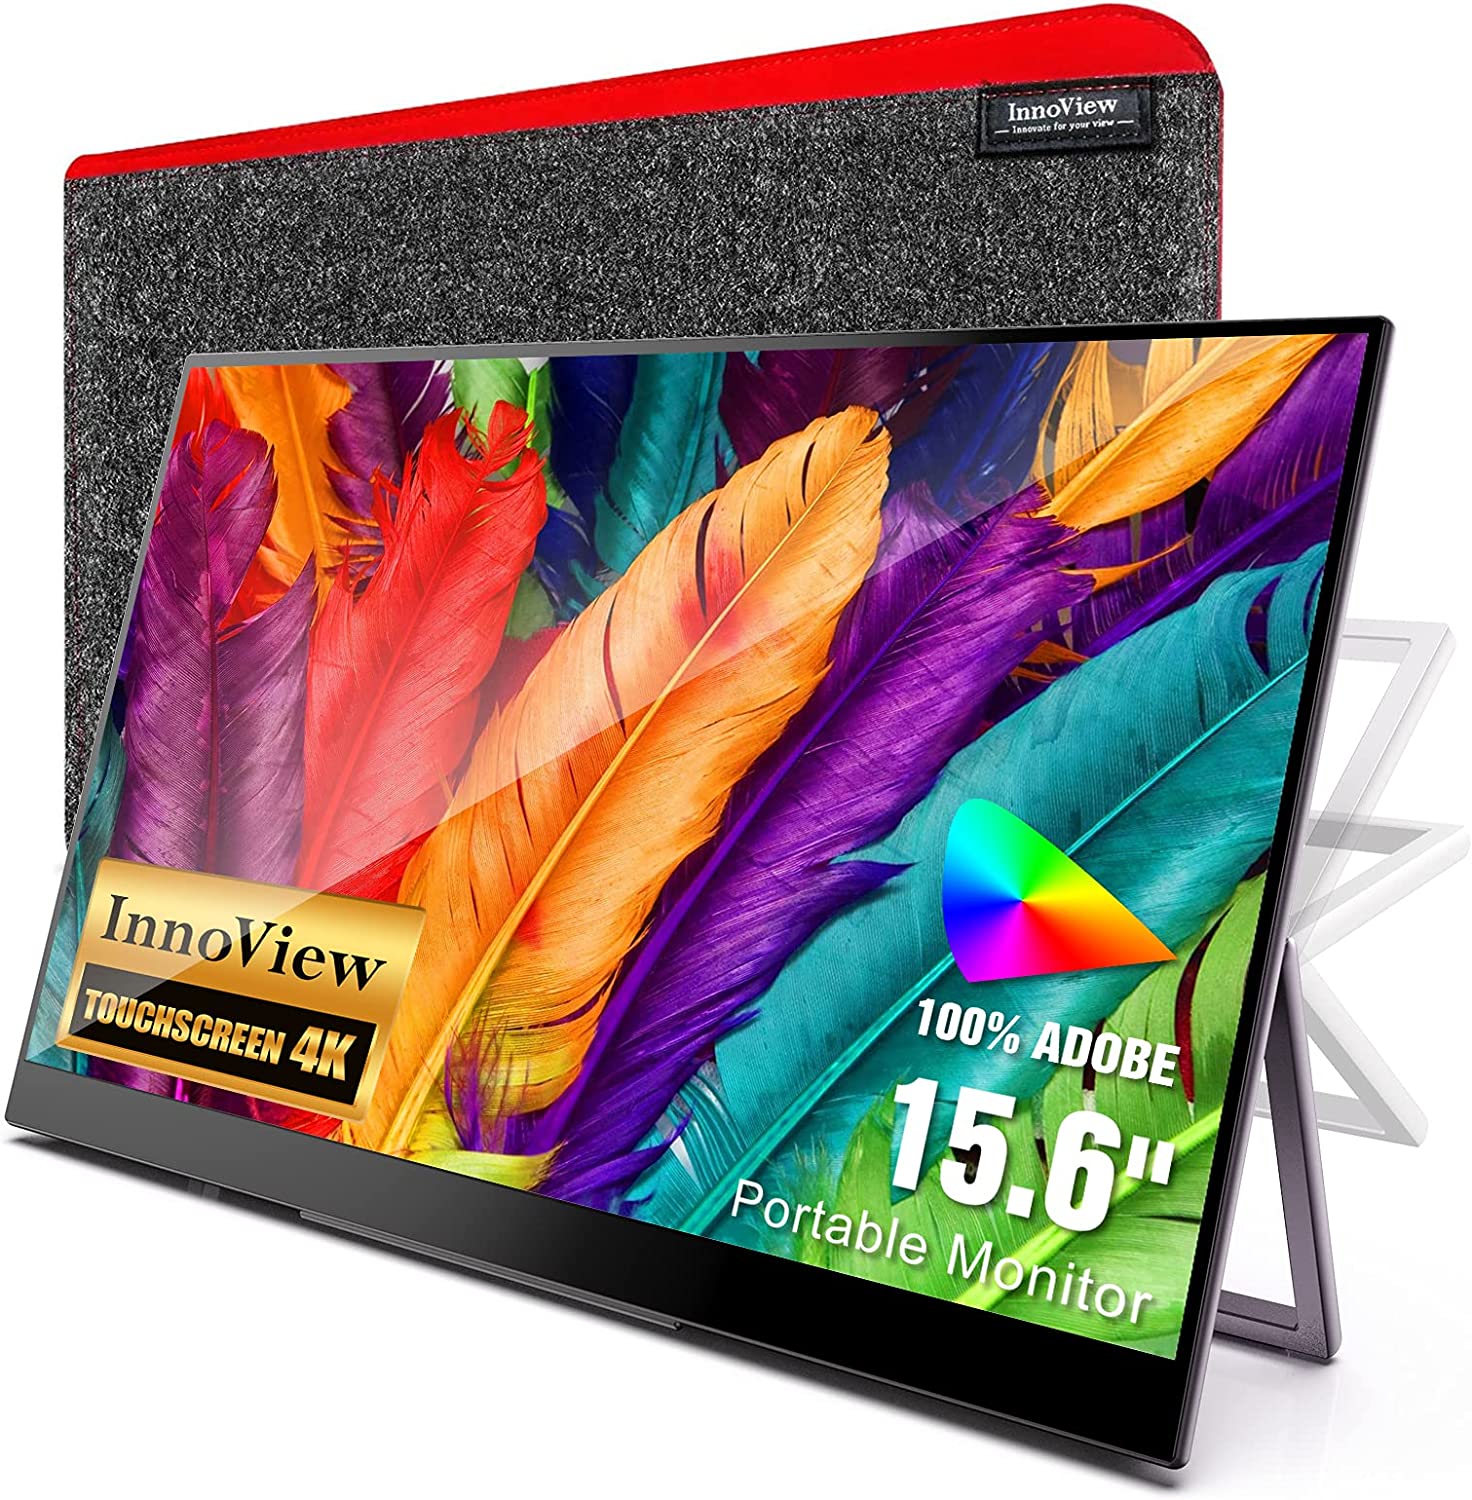 InnoView Portable Monitor 4K Touchscreen, 15.6 Inch [...]